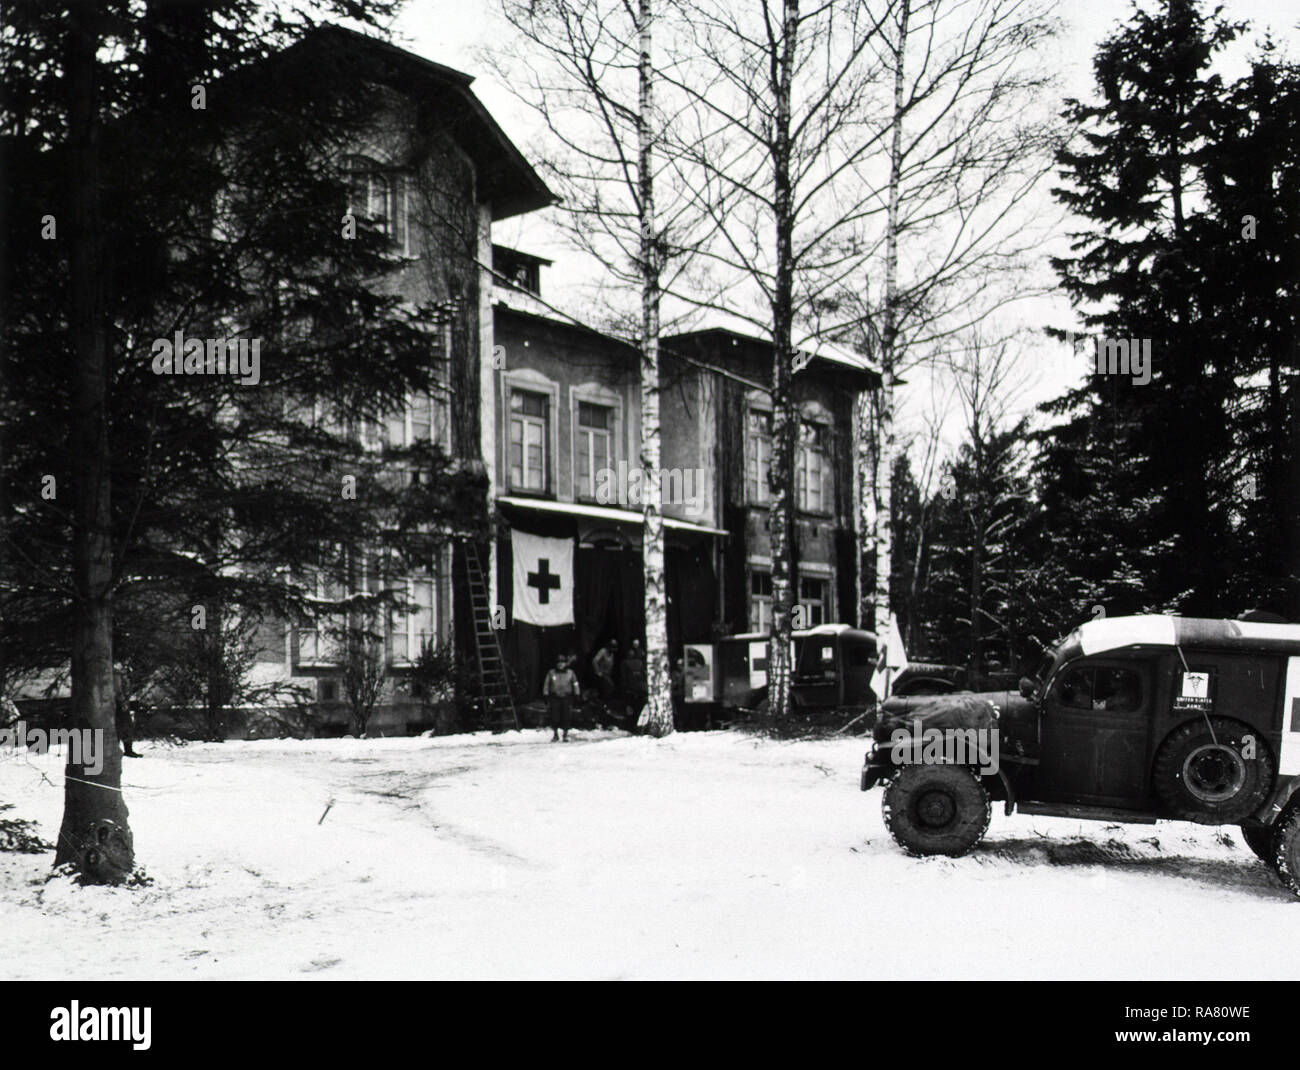 Front exterior view of a country villa that has been converted into a medical clearing station. Snow covers the front yard. Two U.S. Army trucks sit in front. The rear door of the truck closest to the villa is opened, and military personnel hover between the truck and the building. Stock Photo